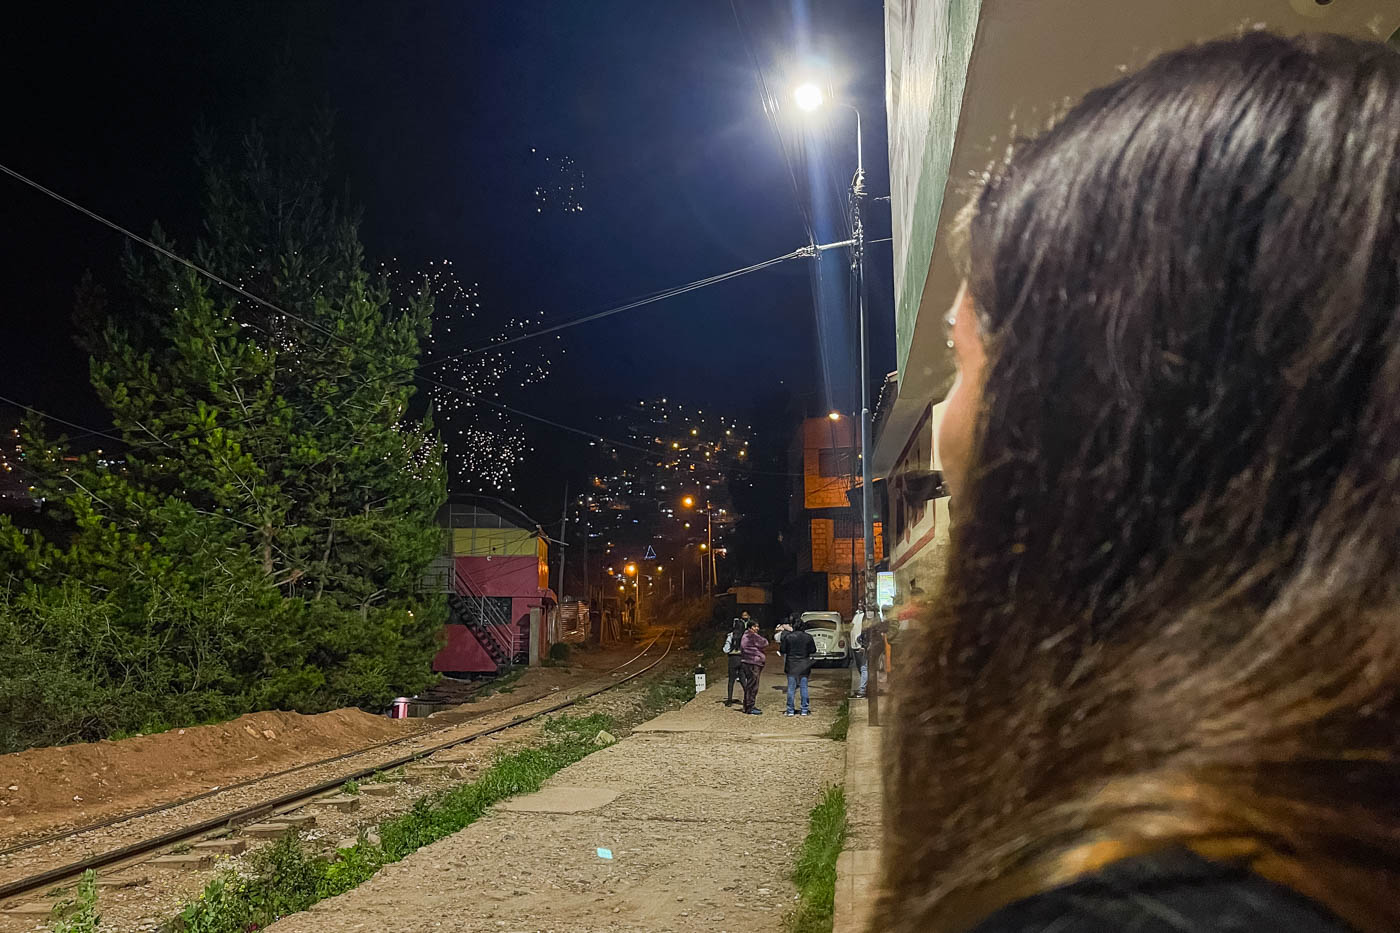 Sara watching fireworks in the distance in Cusco with a view down the train tracks.